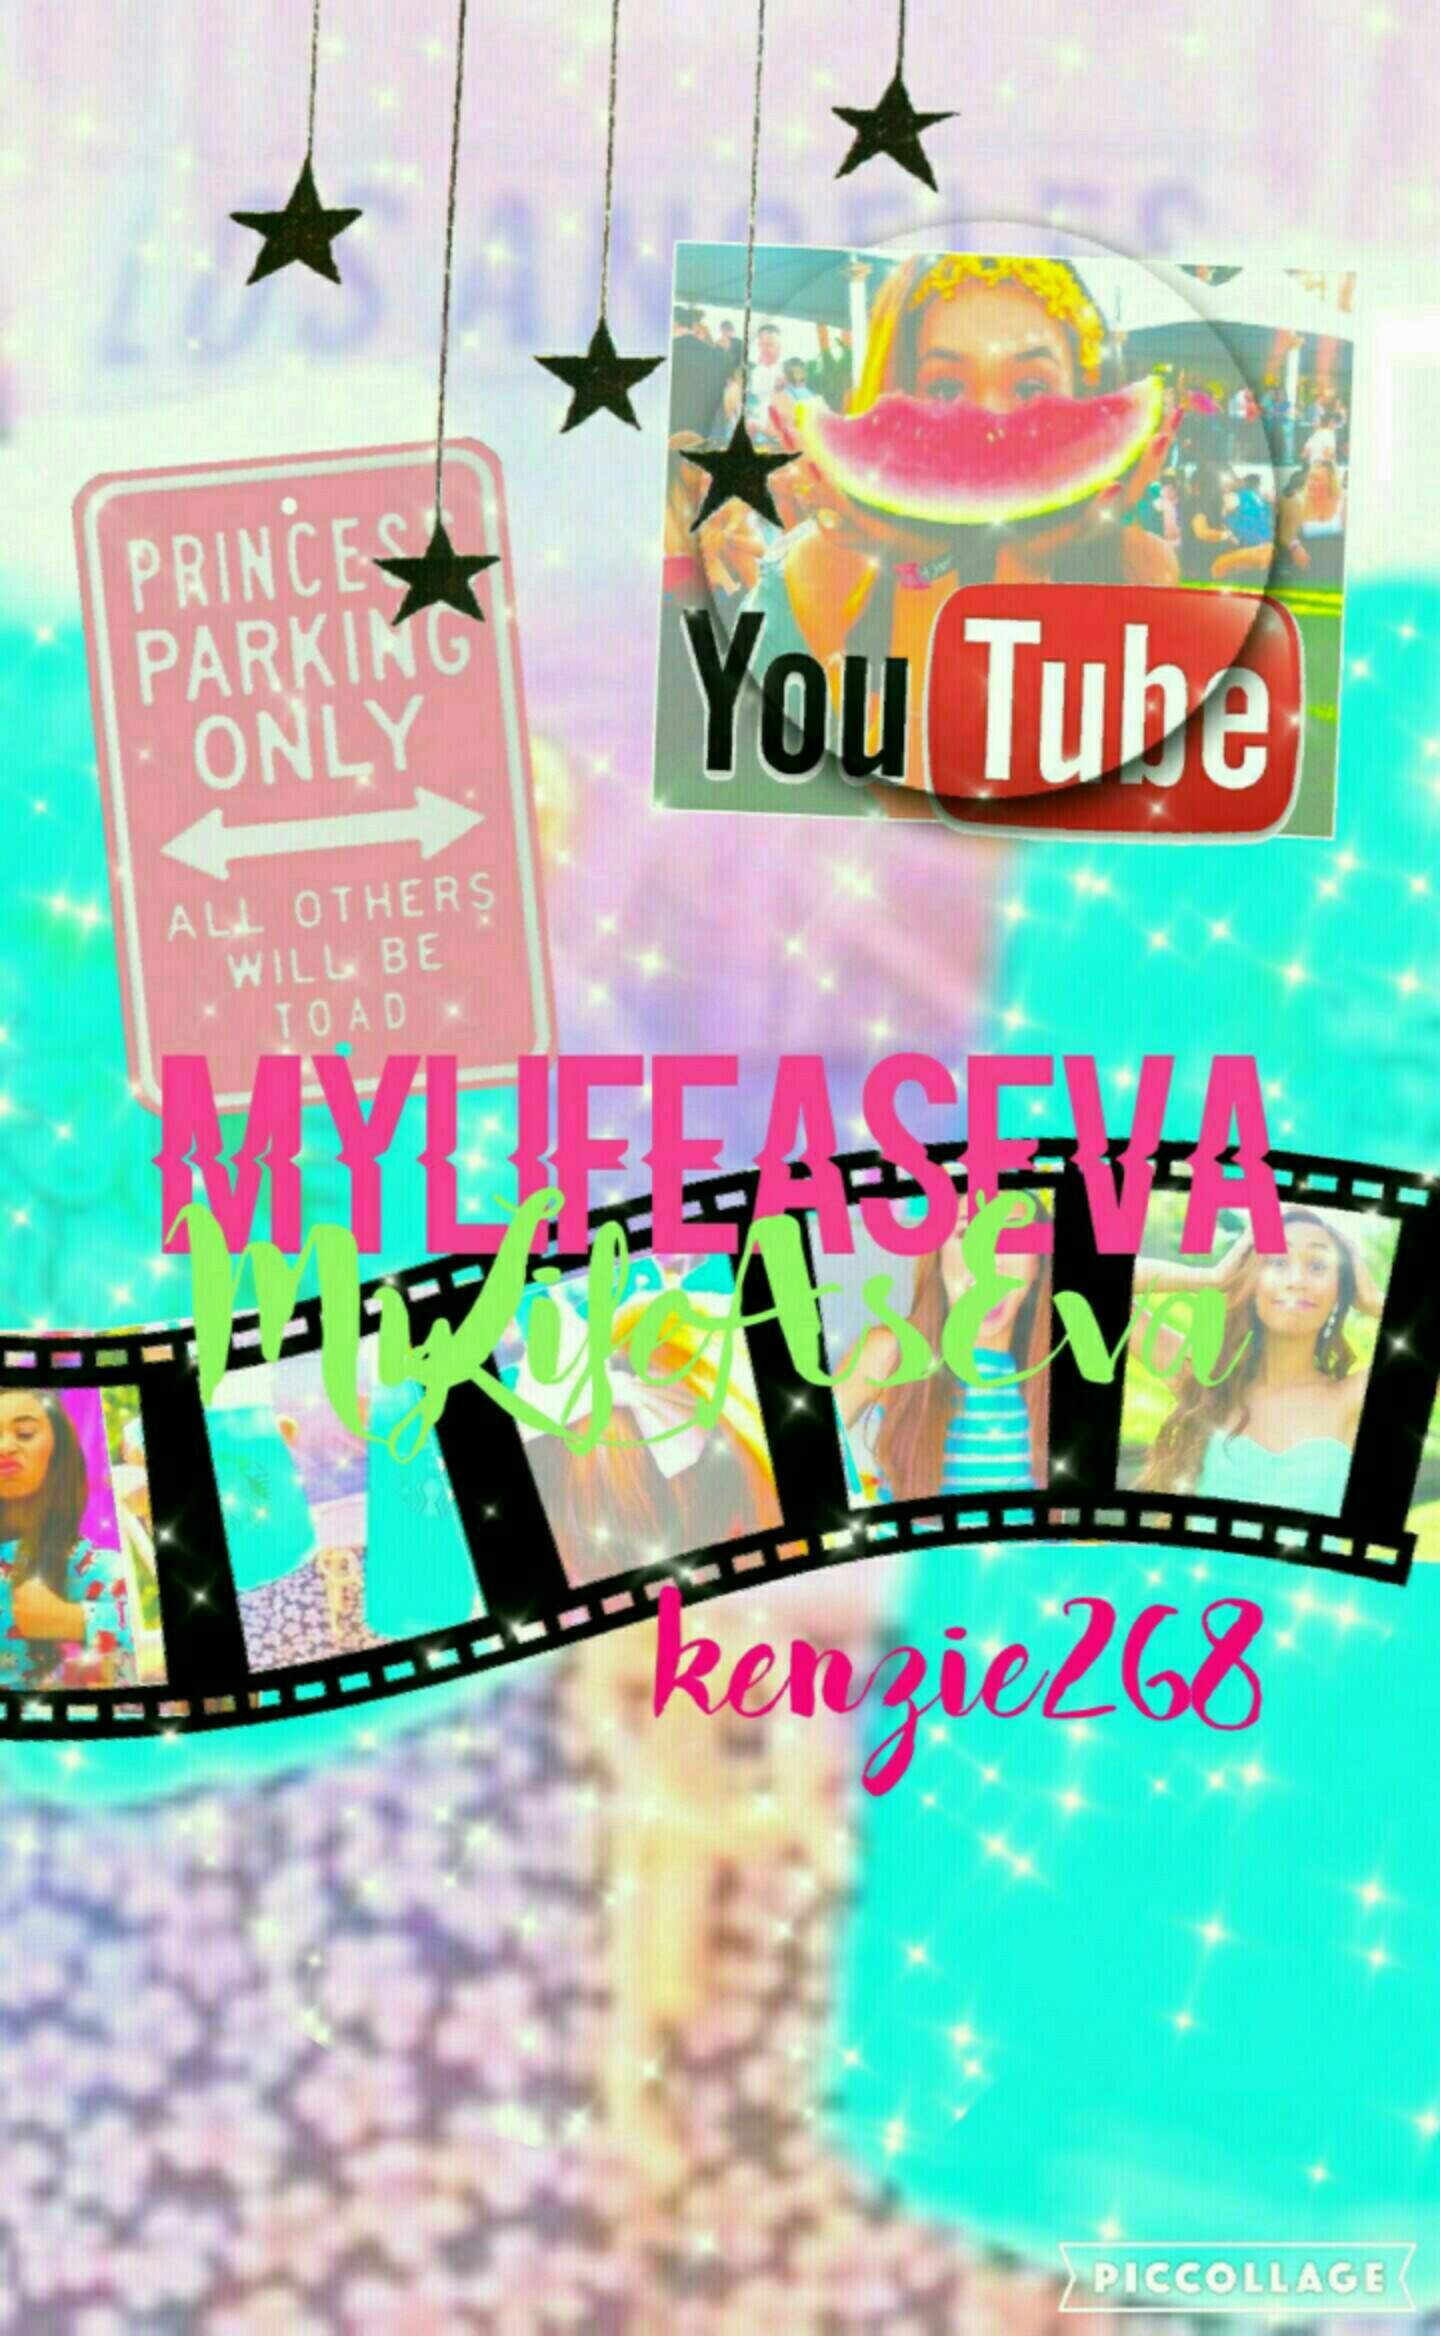 first post of a collage of mine on this account!! hope u guys like it!!♡